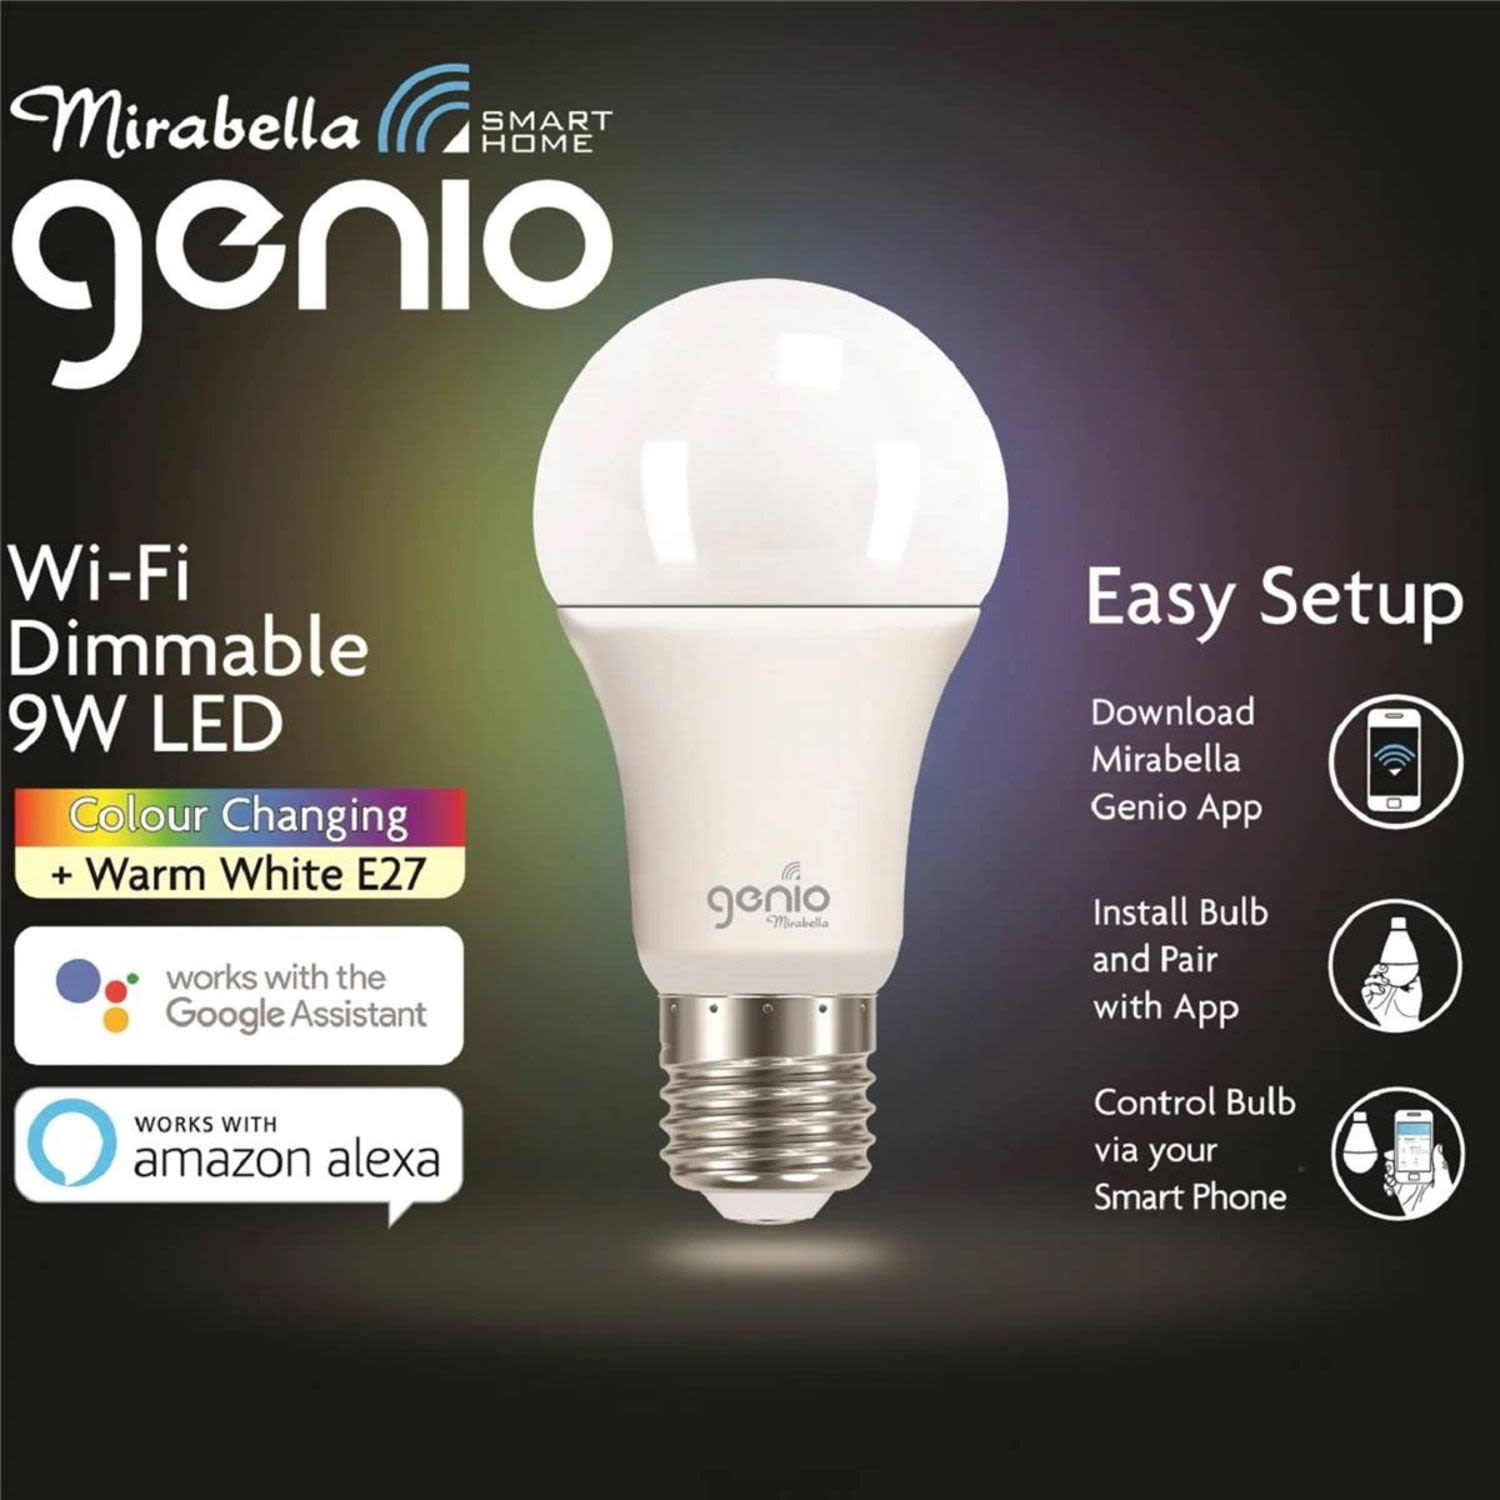 Mirabella Genio 9W Led Dimmable Edison Screw Colour Changing 800 Lumens, 1 Each